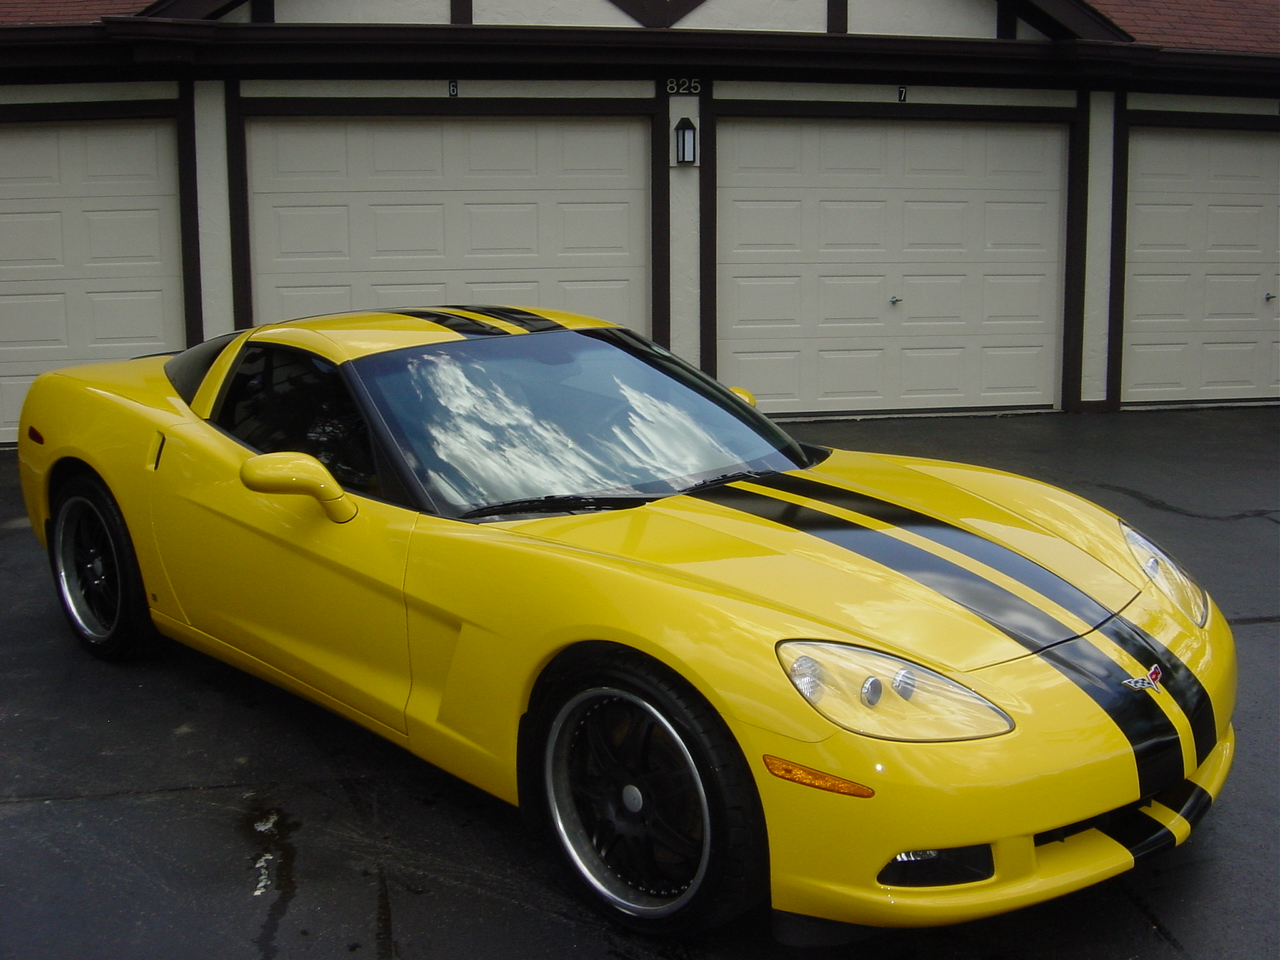 These C6 Corvette racing will fit all C6's models including standa...